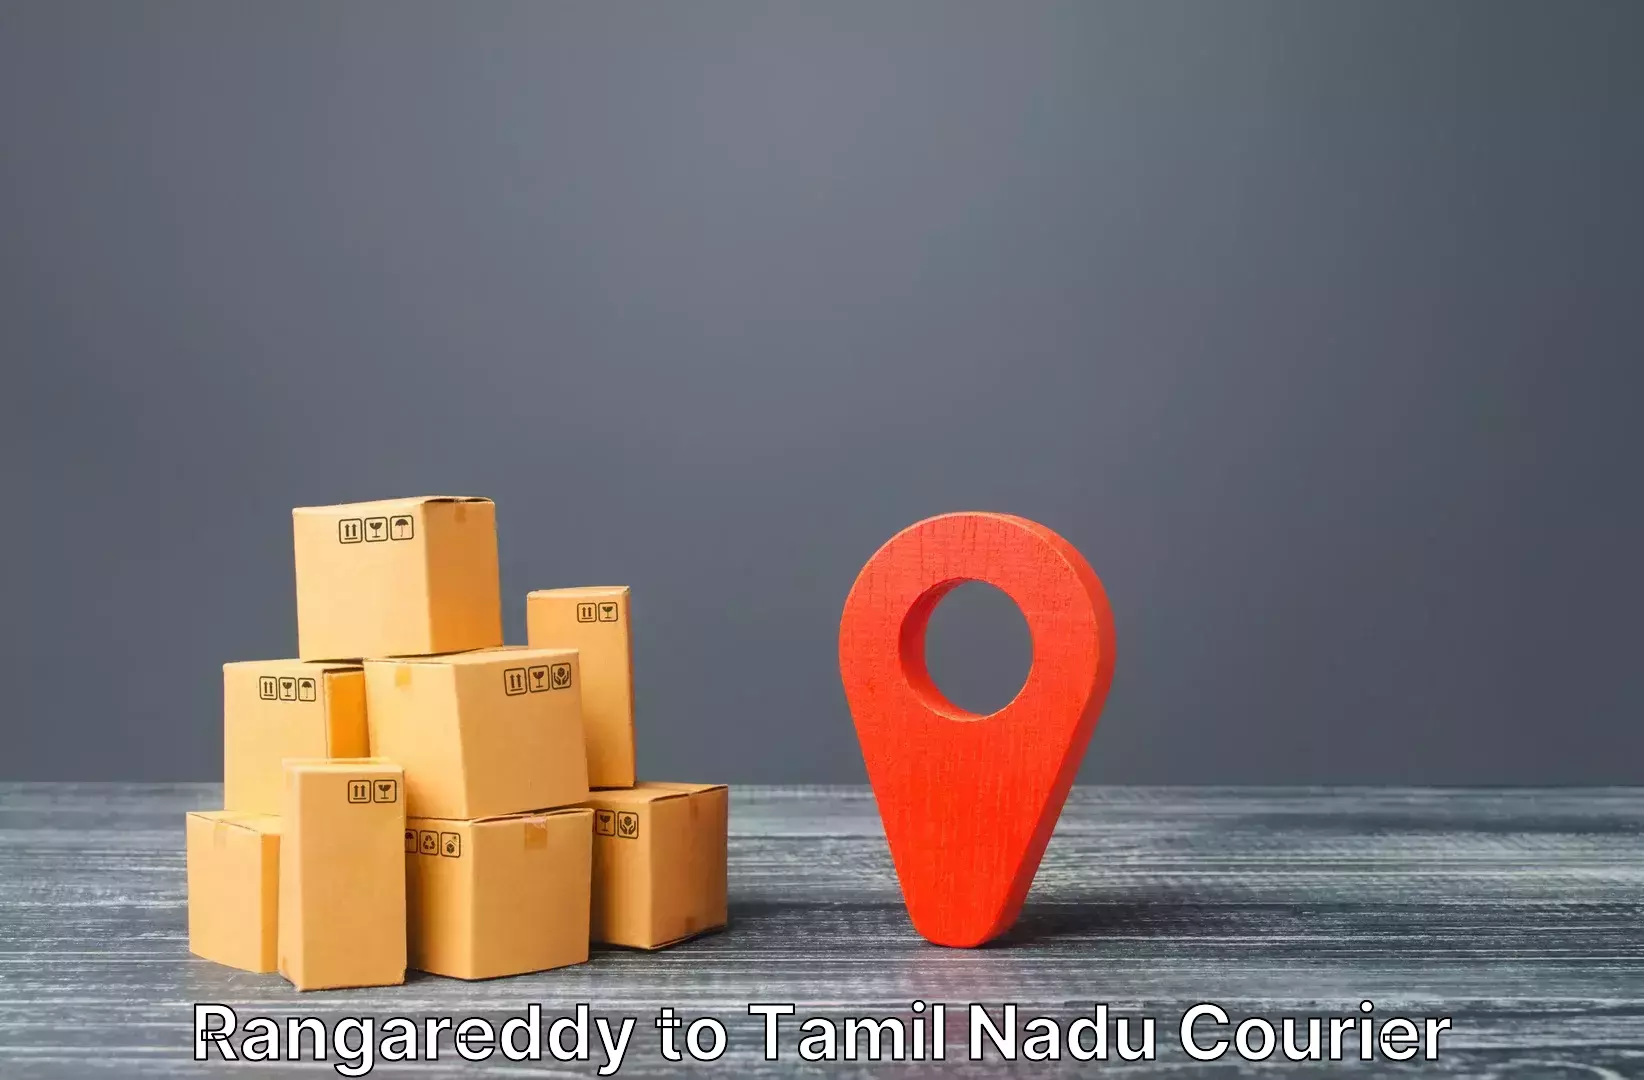 Baggage transport services Rangareddy to Ennore Port Chennai